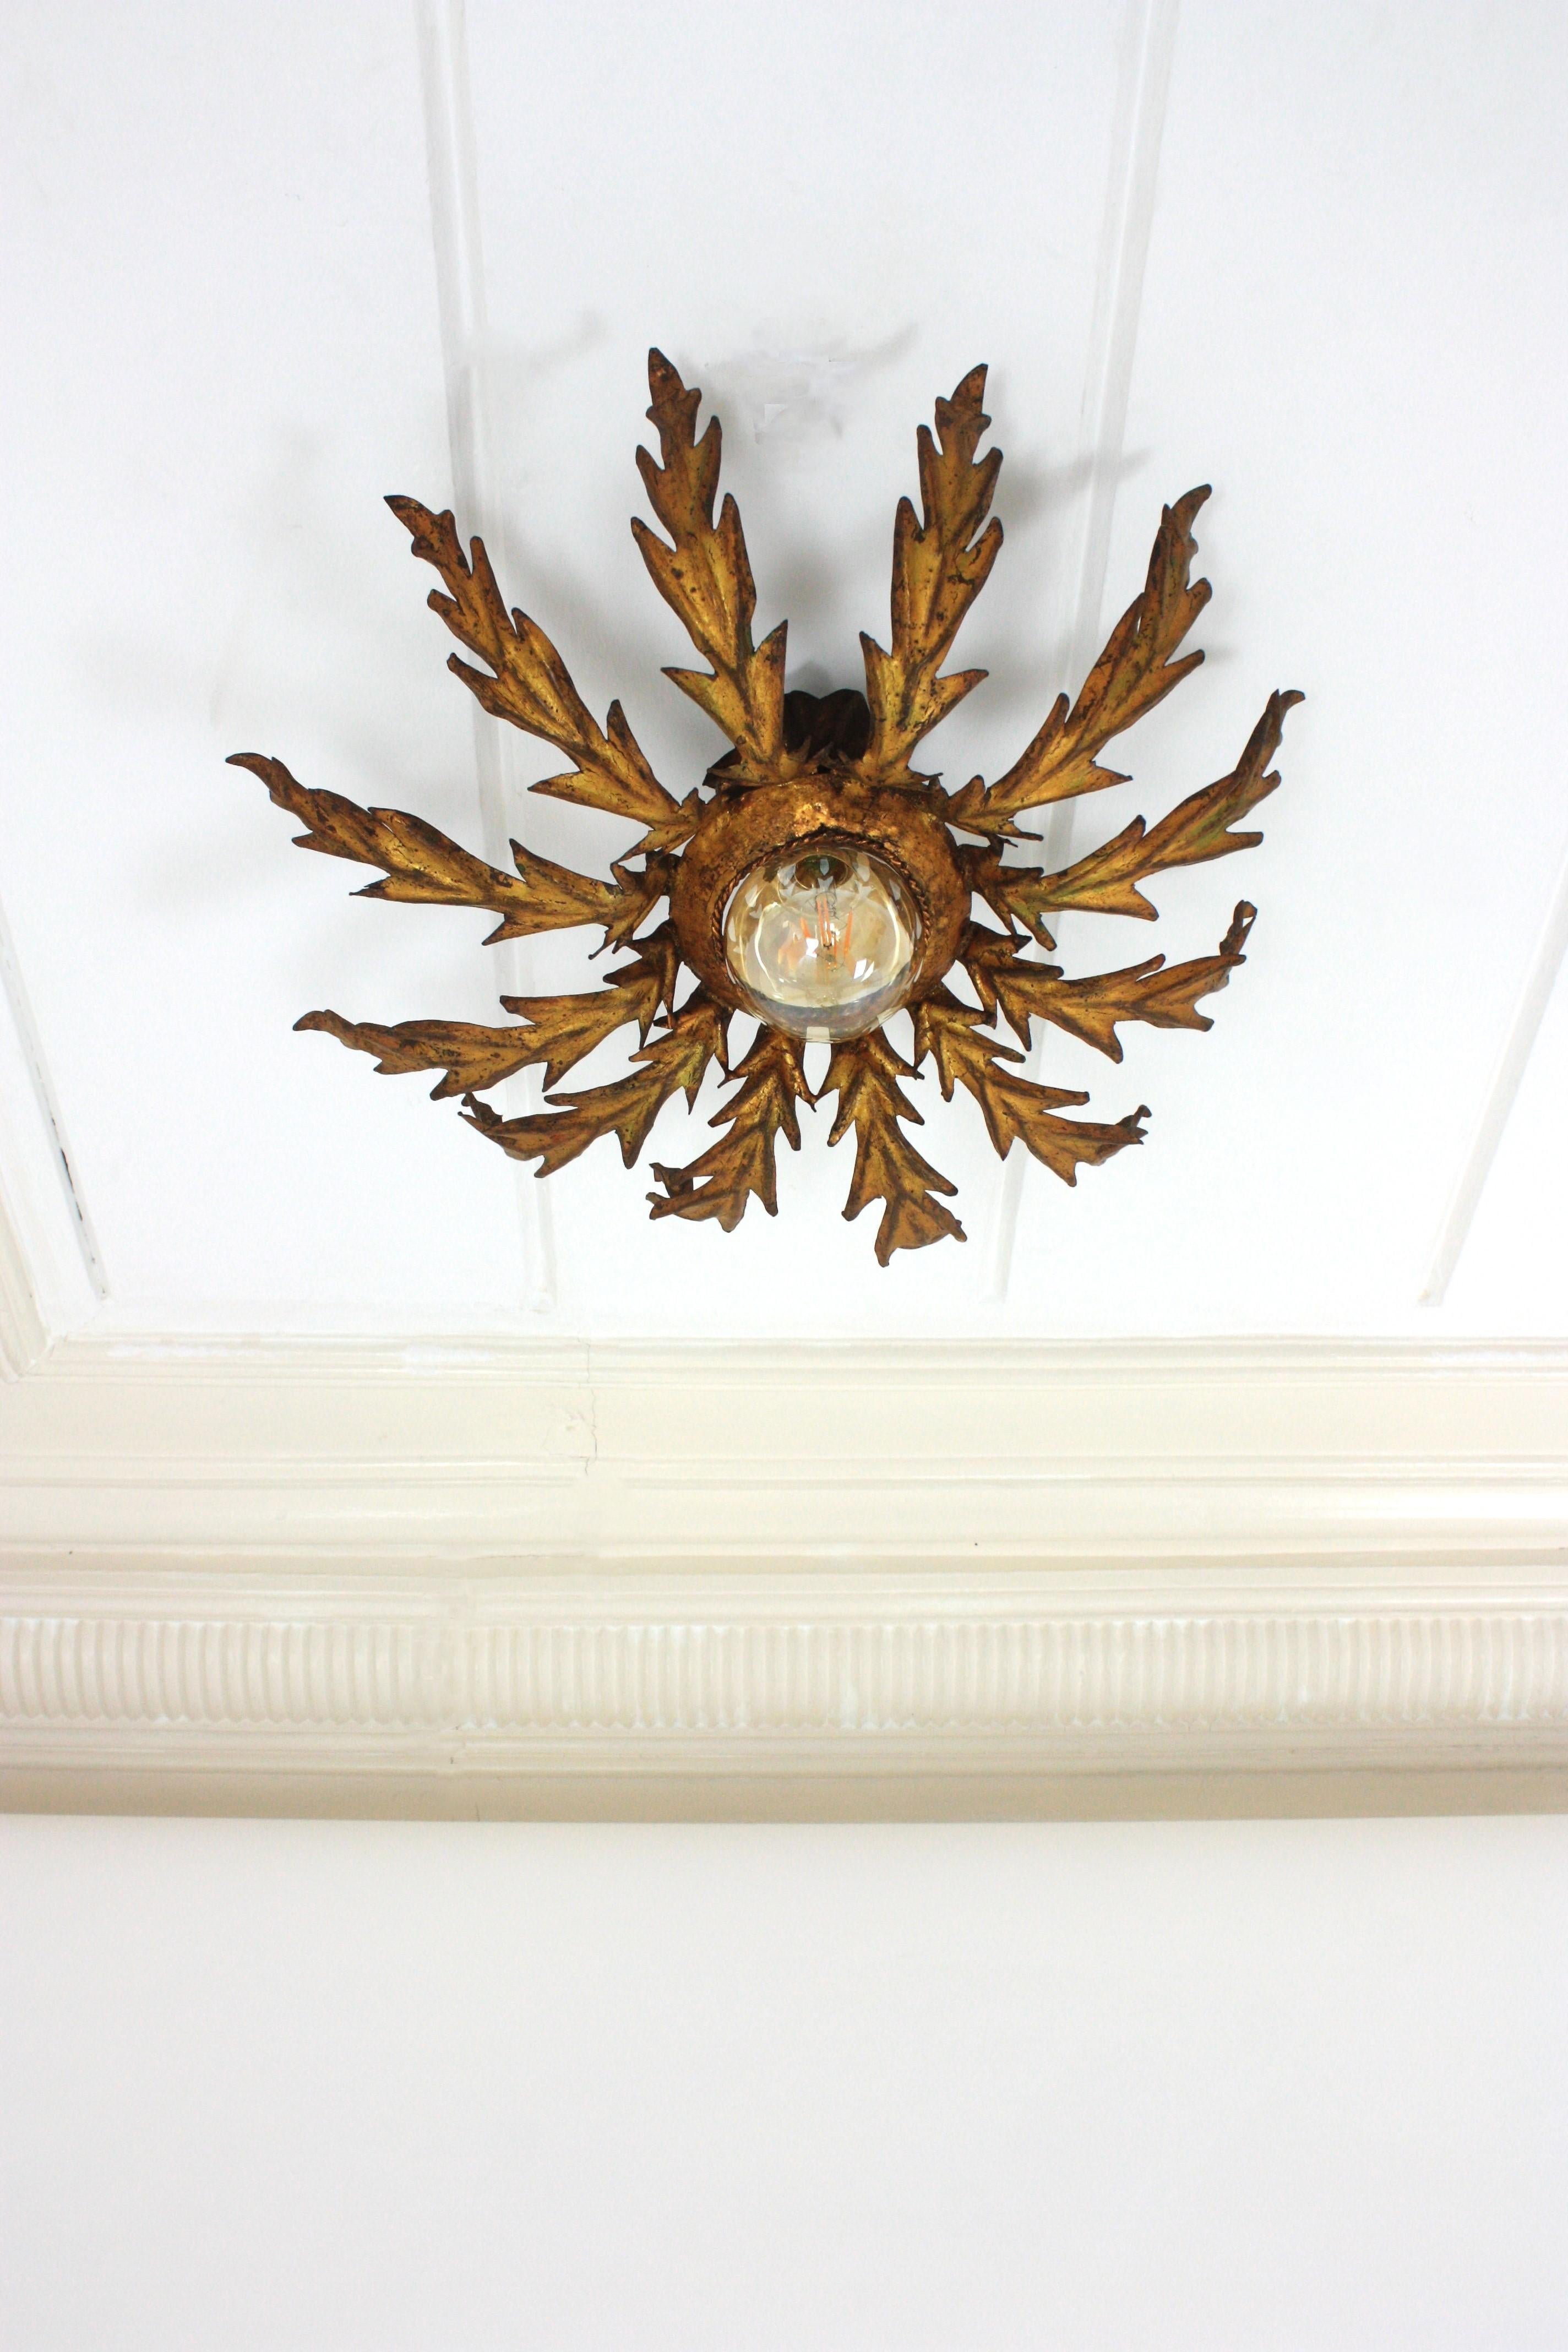 French Sunburst Leafed Ceiling Light Fixture in Gilt Iron, 1940s In Good Condition For Sale In Barcelona, ES